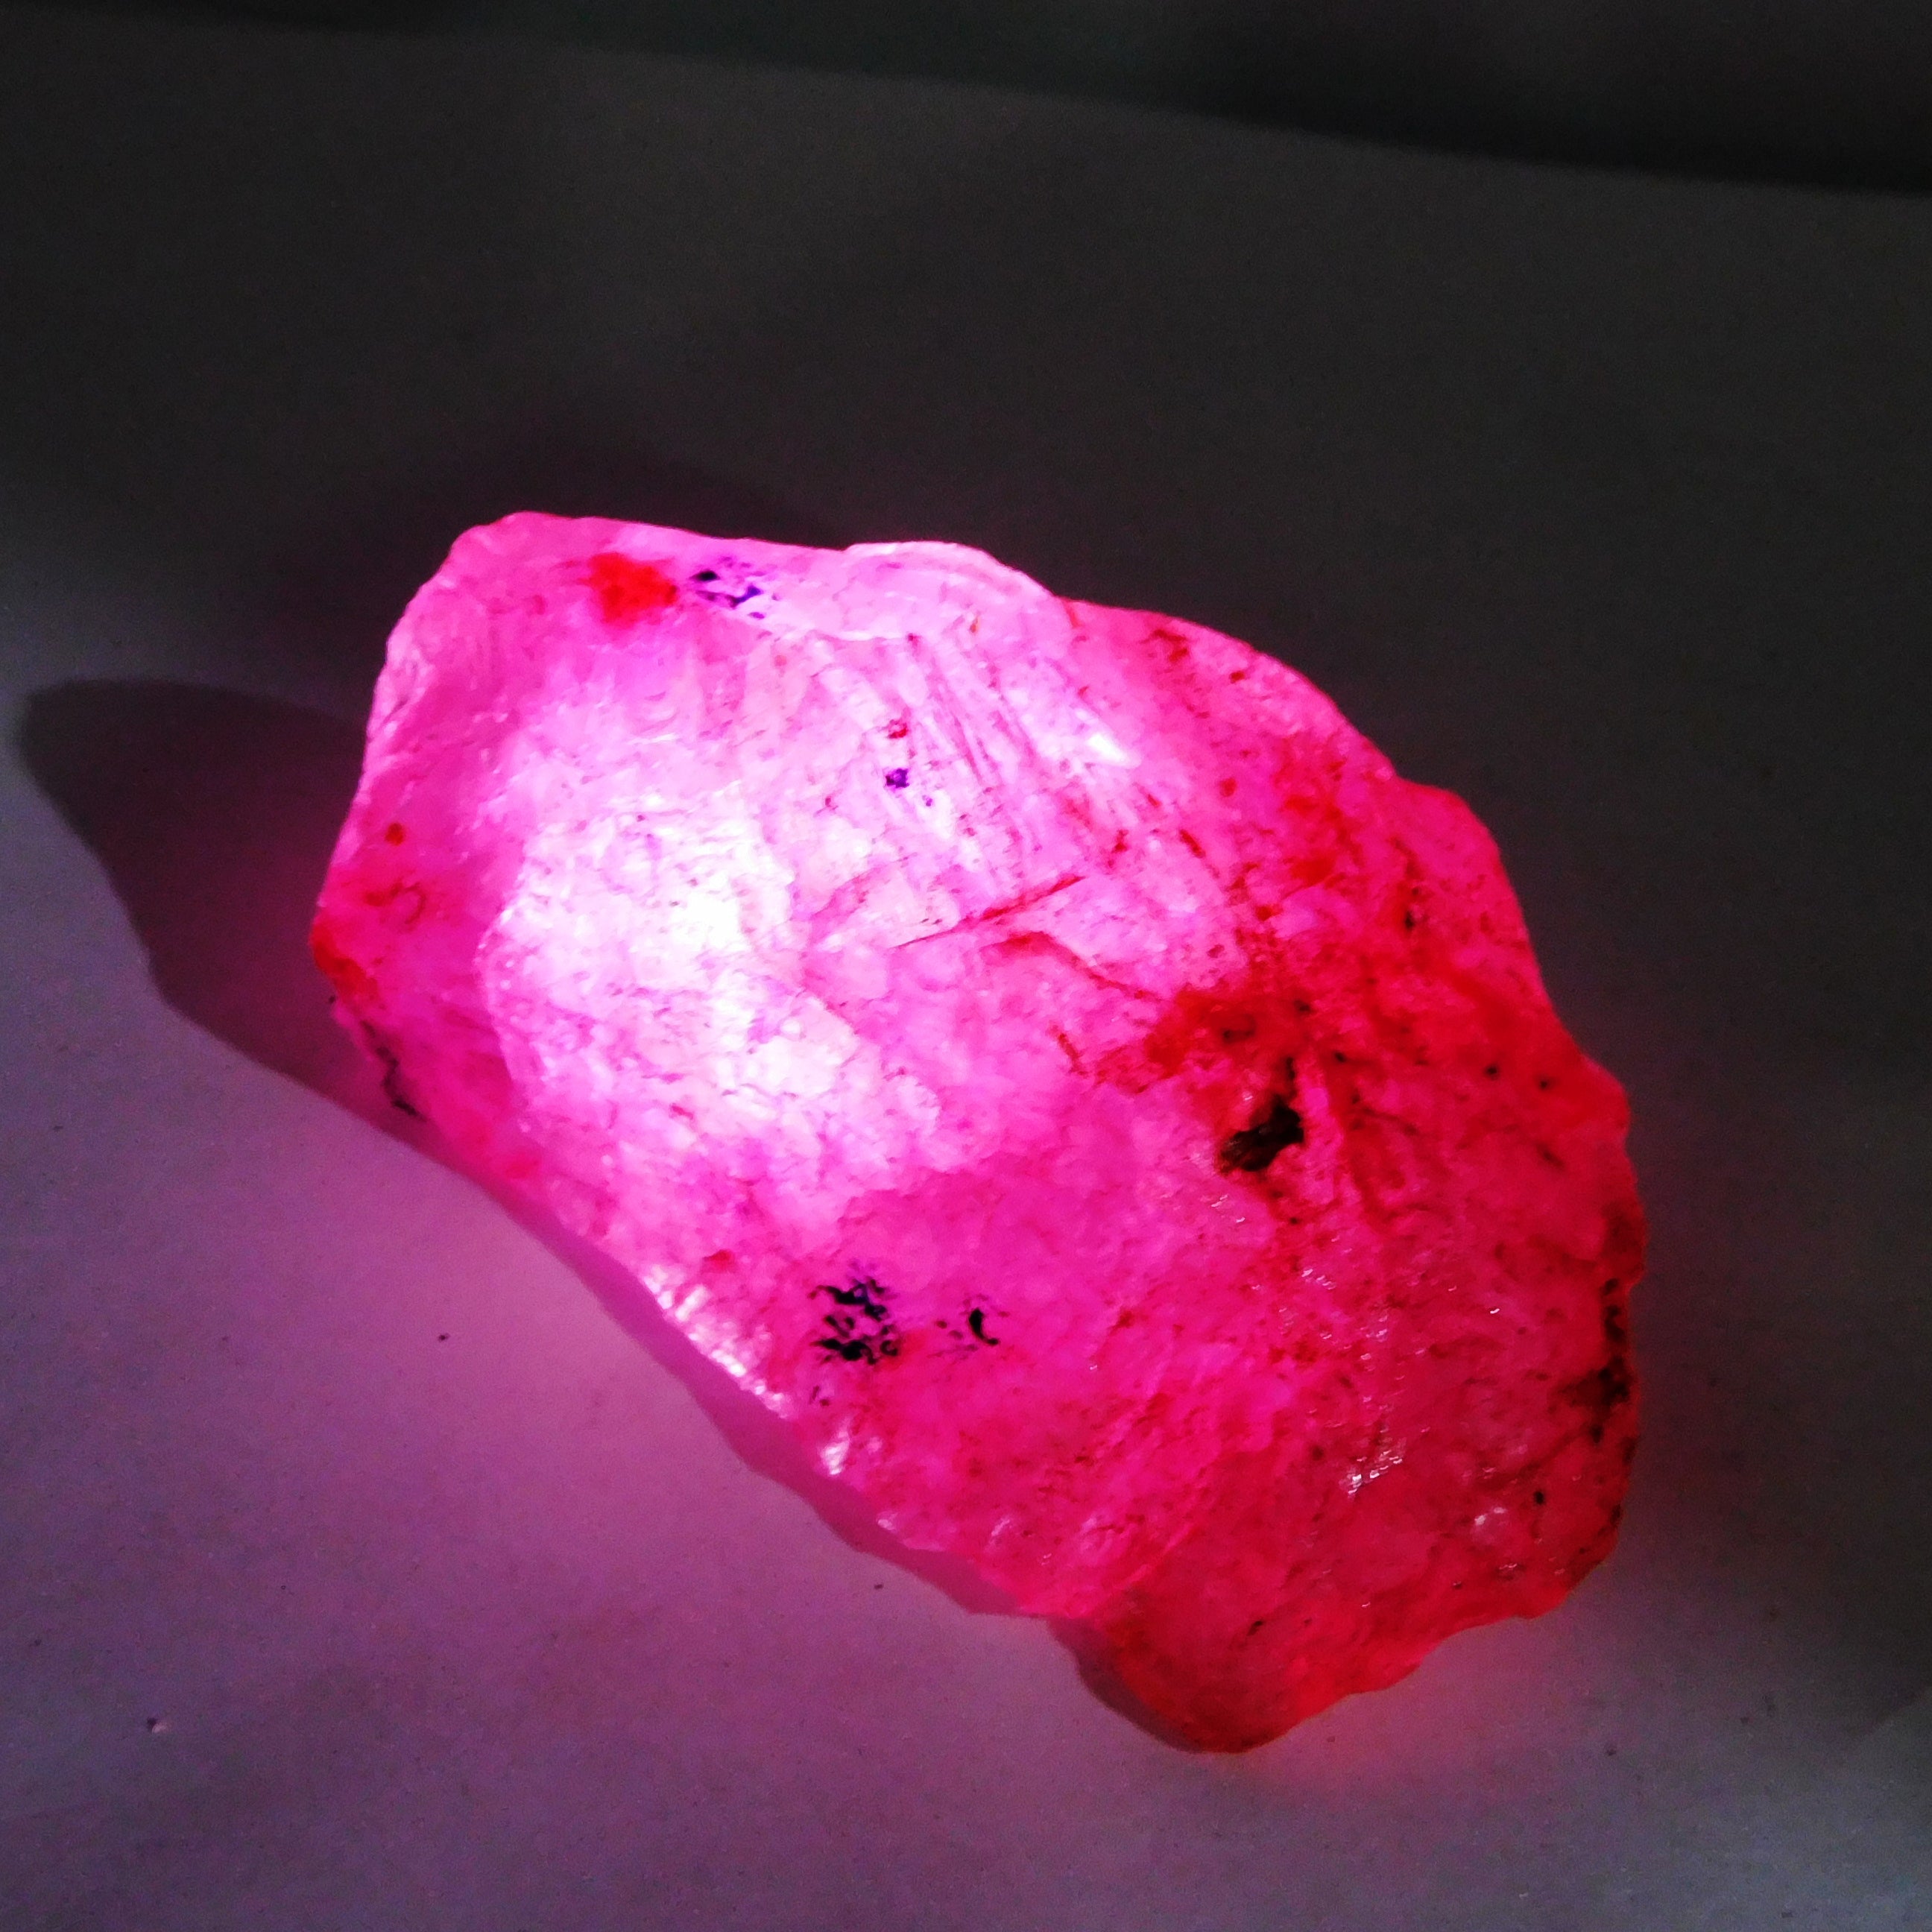 Best Offer !!! Certified Raw Rough 475.10 Carat Uncut Pink Ruby Rough Natural Loose Gemstone , Huge Size Rough , Pink Rough, July Pink Rough